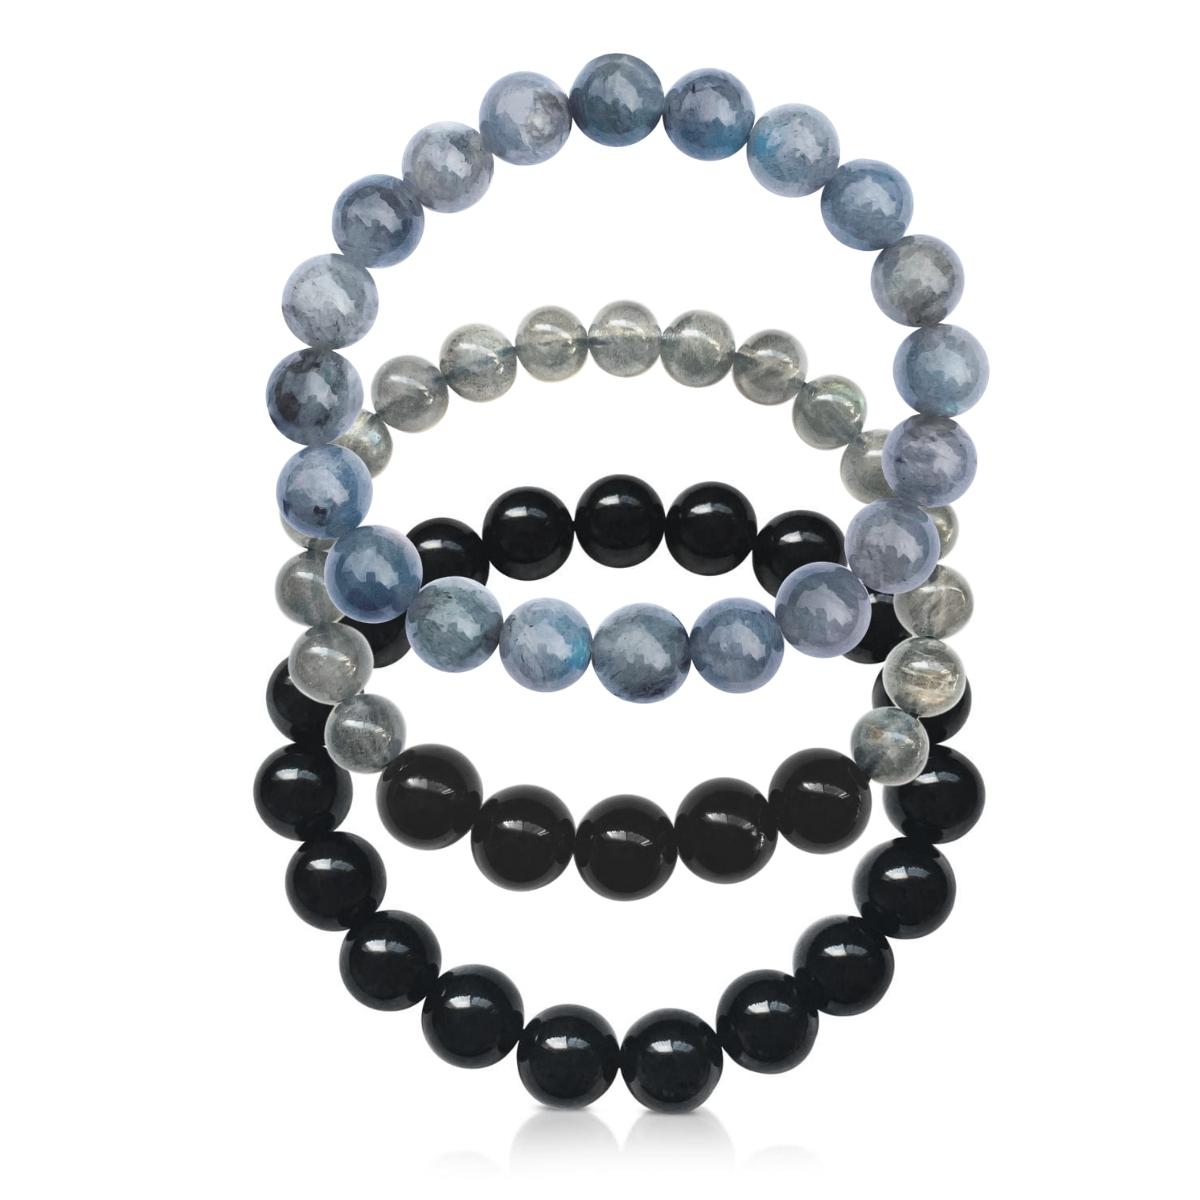 Self Control Stack: Which are the Best Stones and Crystals for Self Control? Onyx helps one have self-control and anchors one’s flighty energy into a more stable way of life. It is this stone of inner strength and endurance, helping one to carry even the most difficult task to completion.